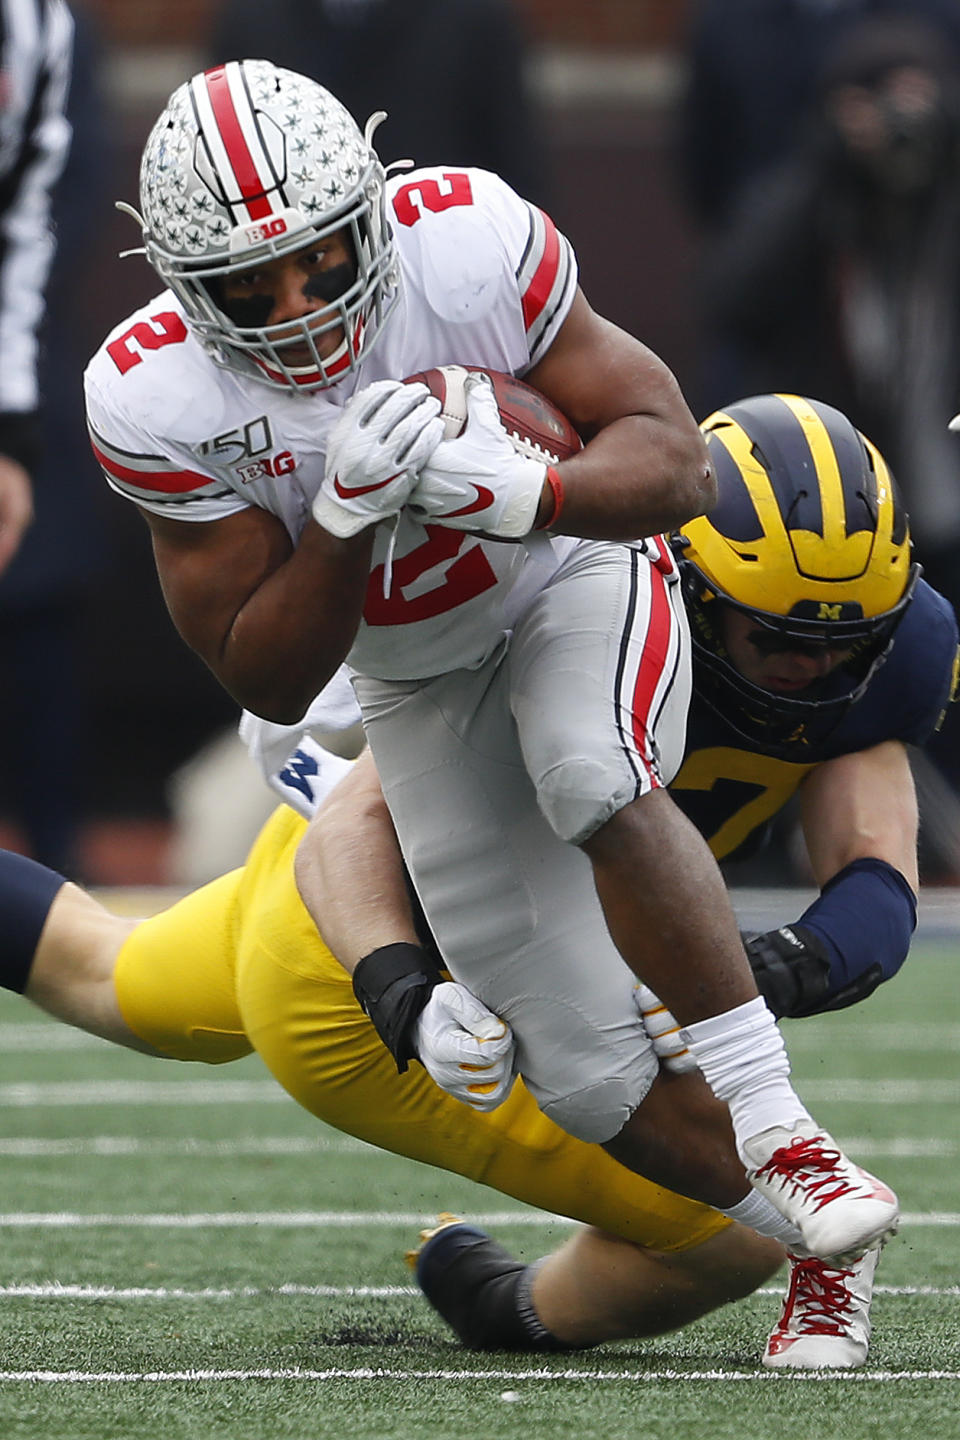 Ohio State running back J.K. Dobbins (2) escapes the tackle of Michigan defensive lineman Aidan Hutchinson (97) in the first half of an NCAA college football game in Ann Arbor, Mich., Saturday, Nov. 30, 2019. (AP Photo/Paul Sancya)